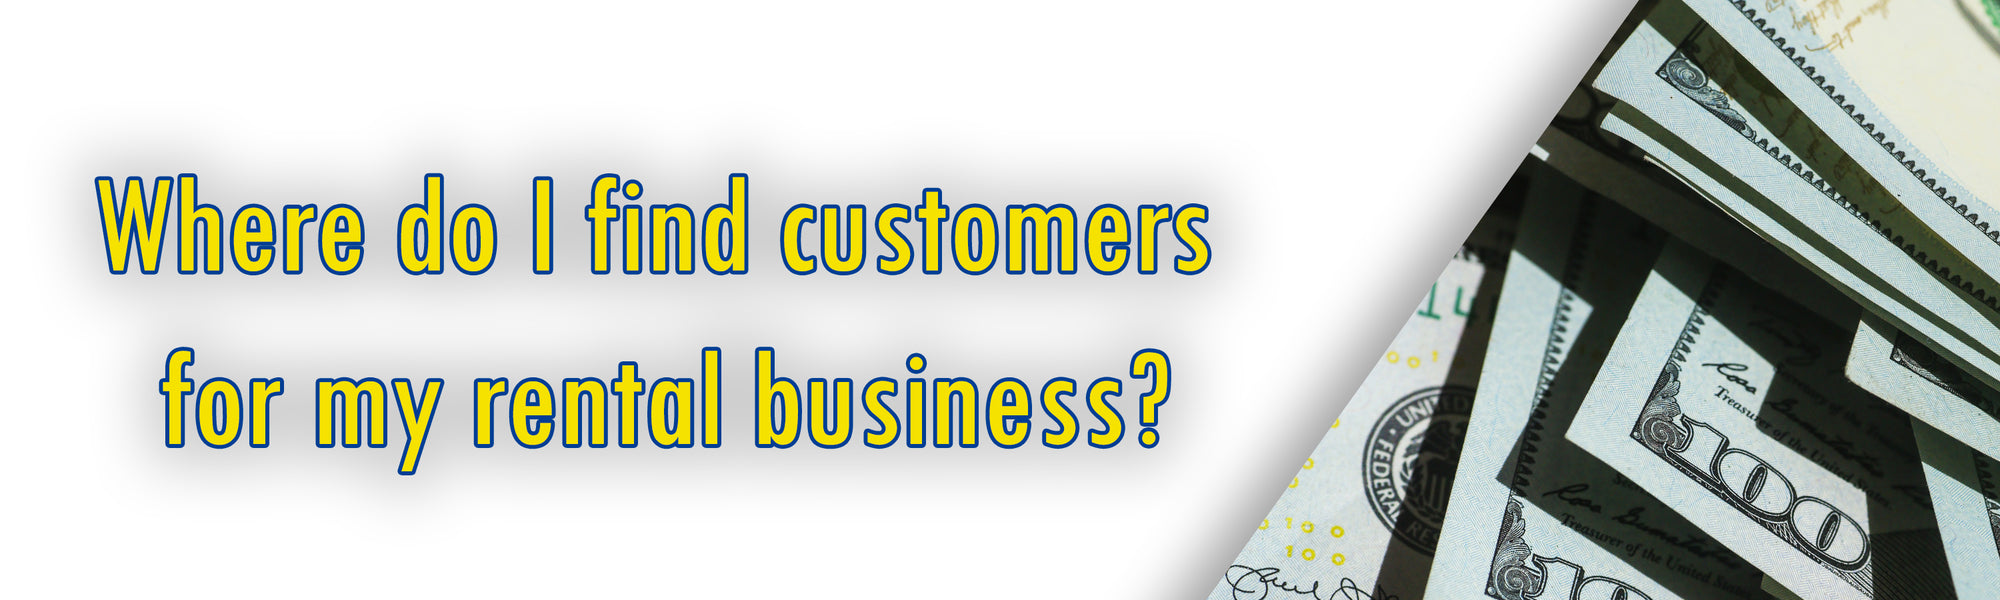 How to find customers for your rental business!